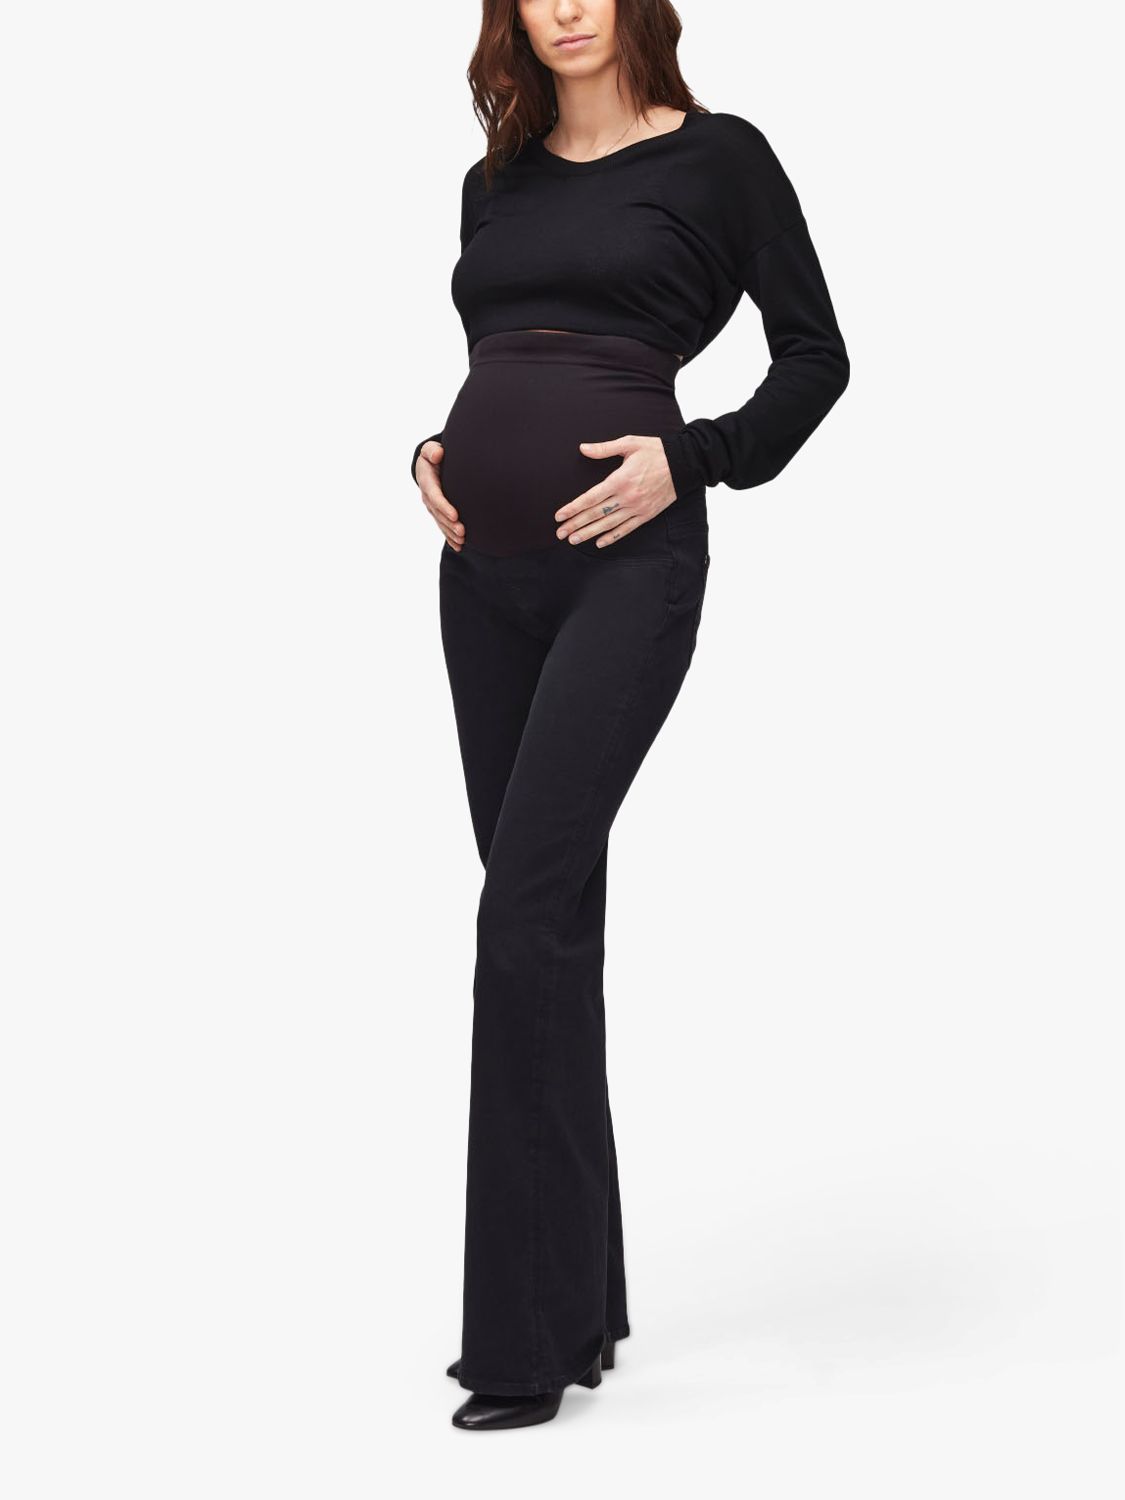 7 For All Mankind Bootcut Maternity Jeans, Black, 26